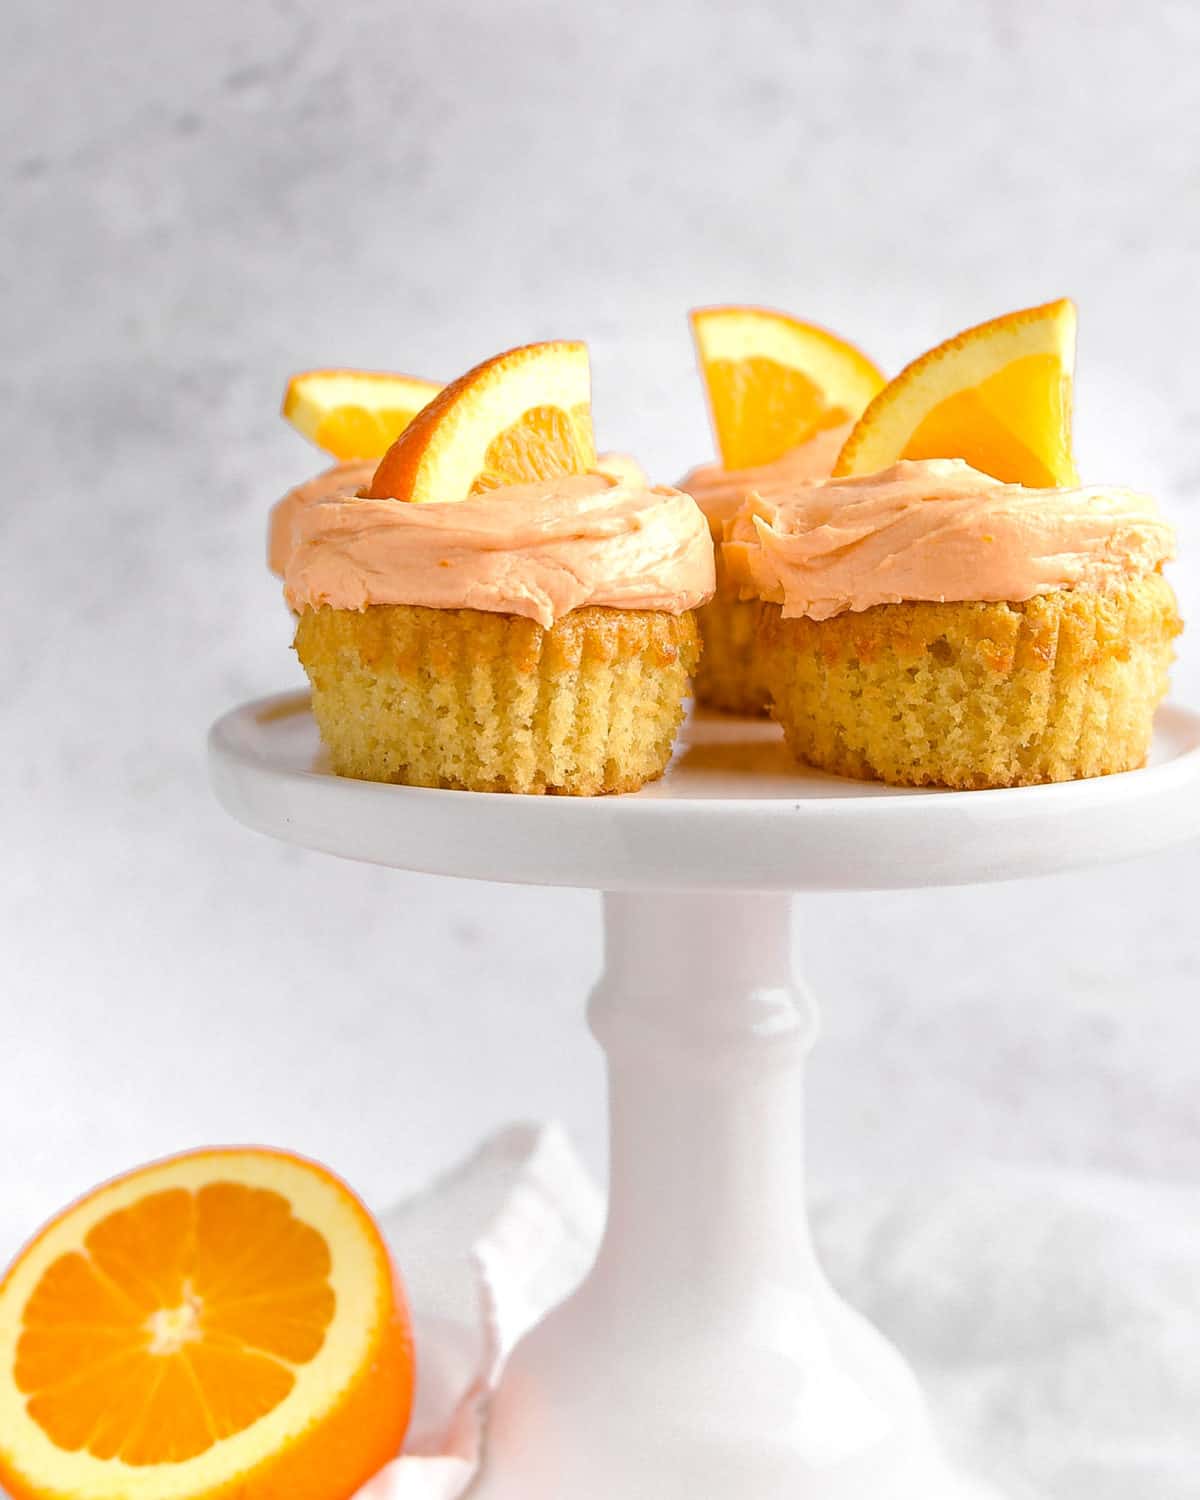 Cupcakes on a stand topped with orange wedges.